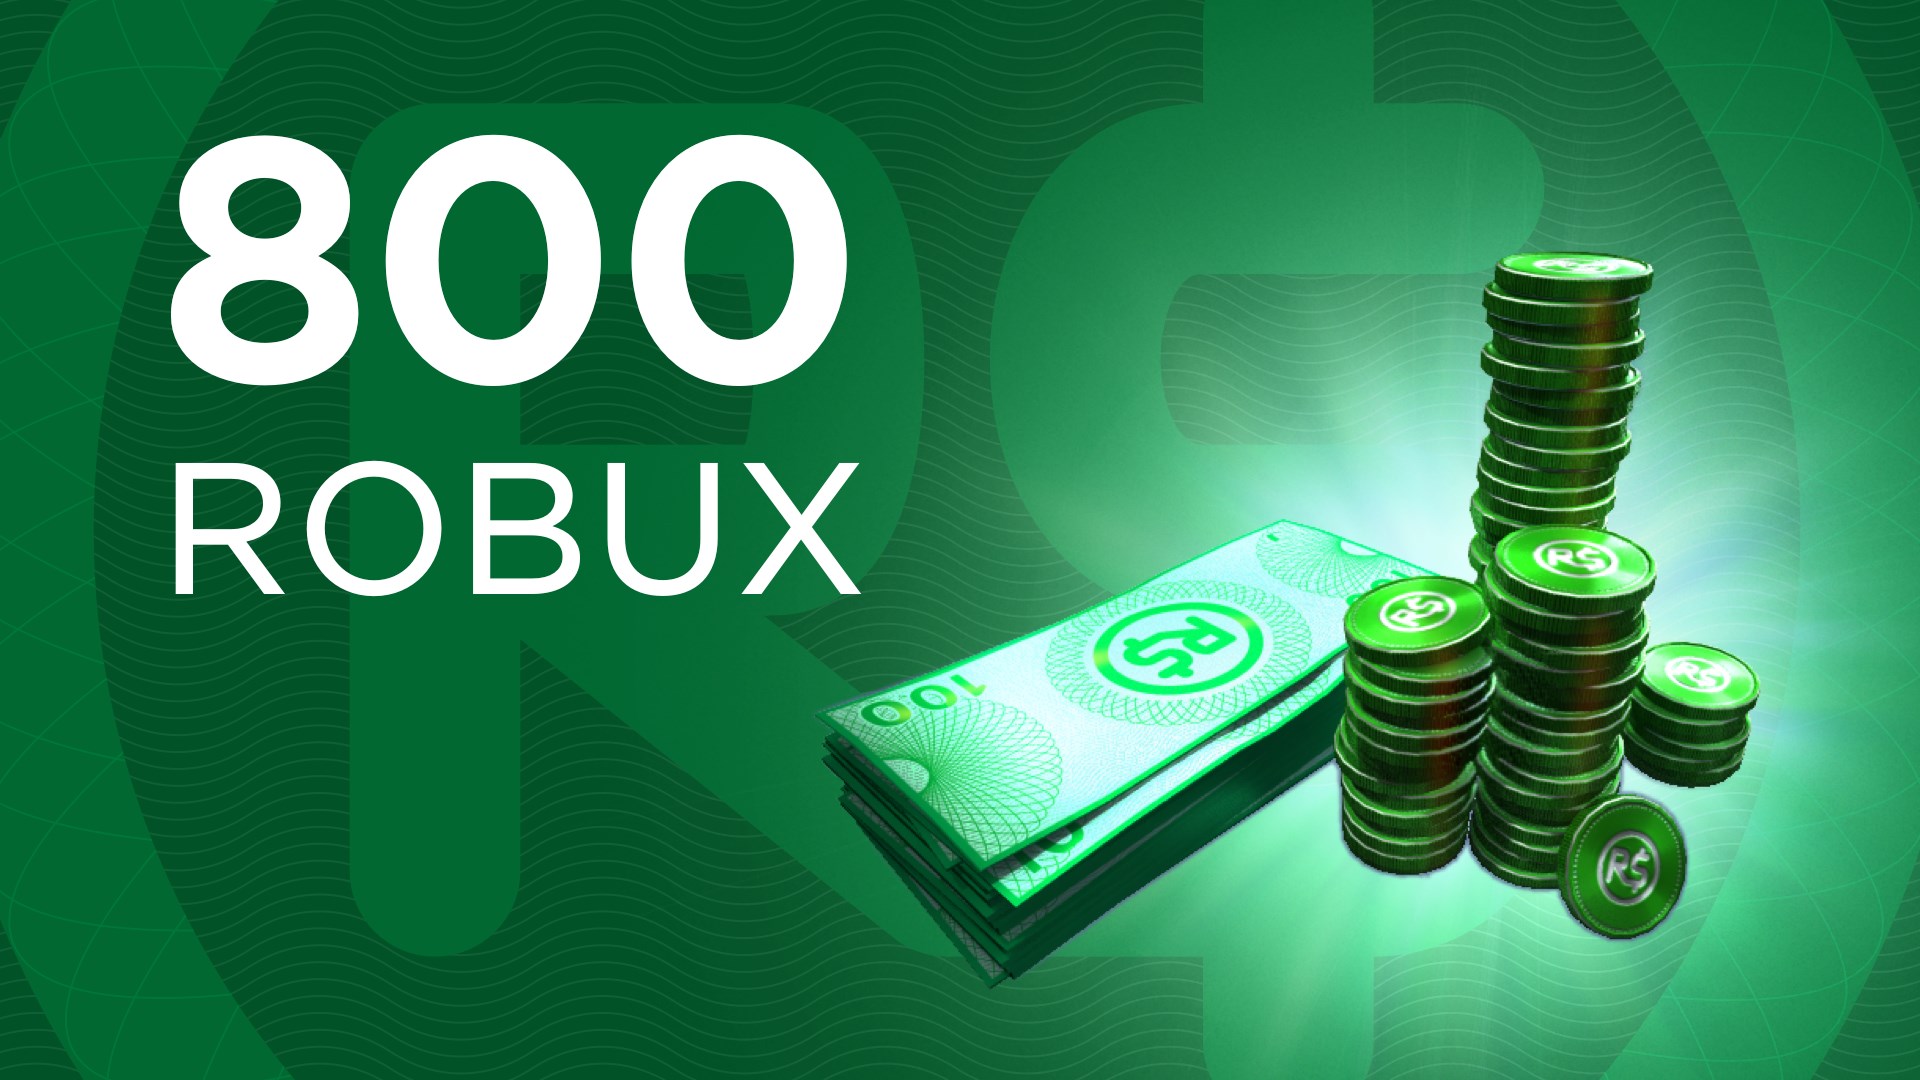 Buy 800 Robux For Xbox Microsoft Store - 800 robux for xbox